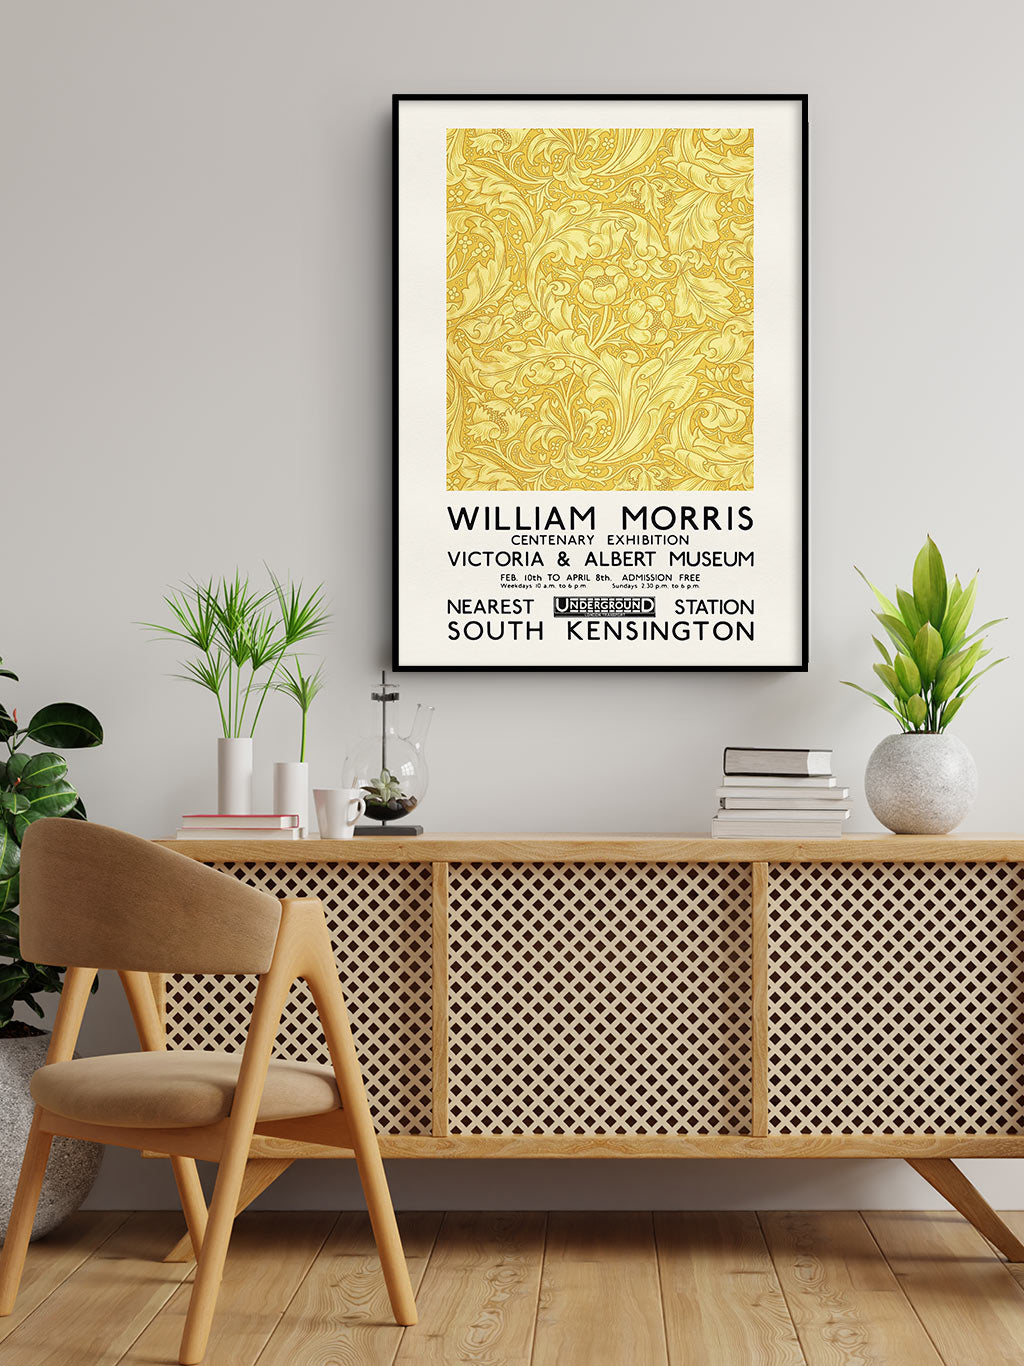 Bachelor's Button by William Morris - Exhibition Poster